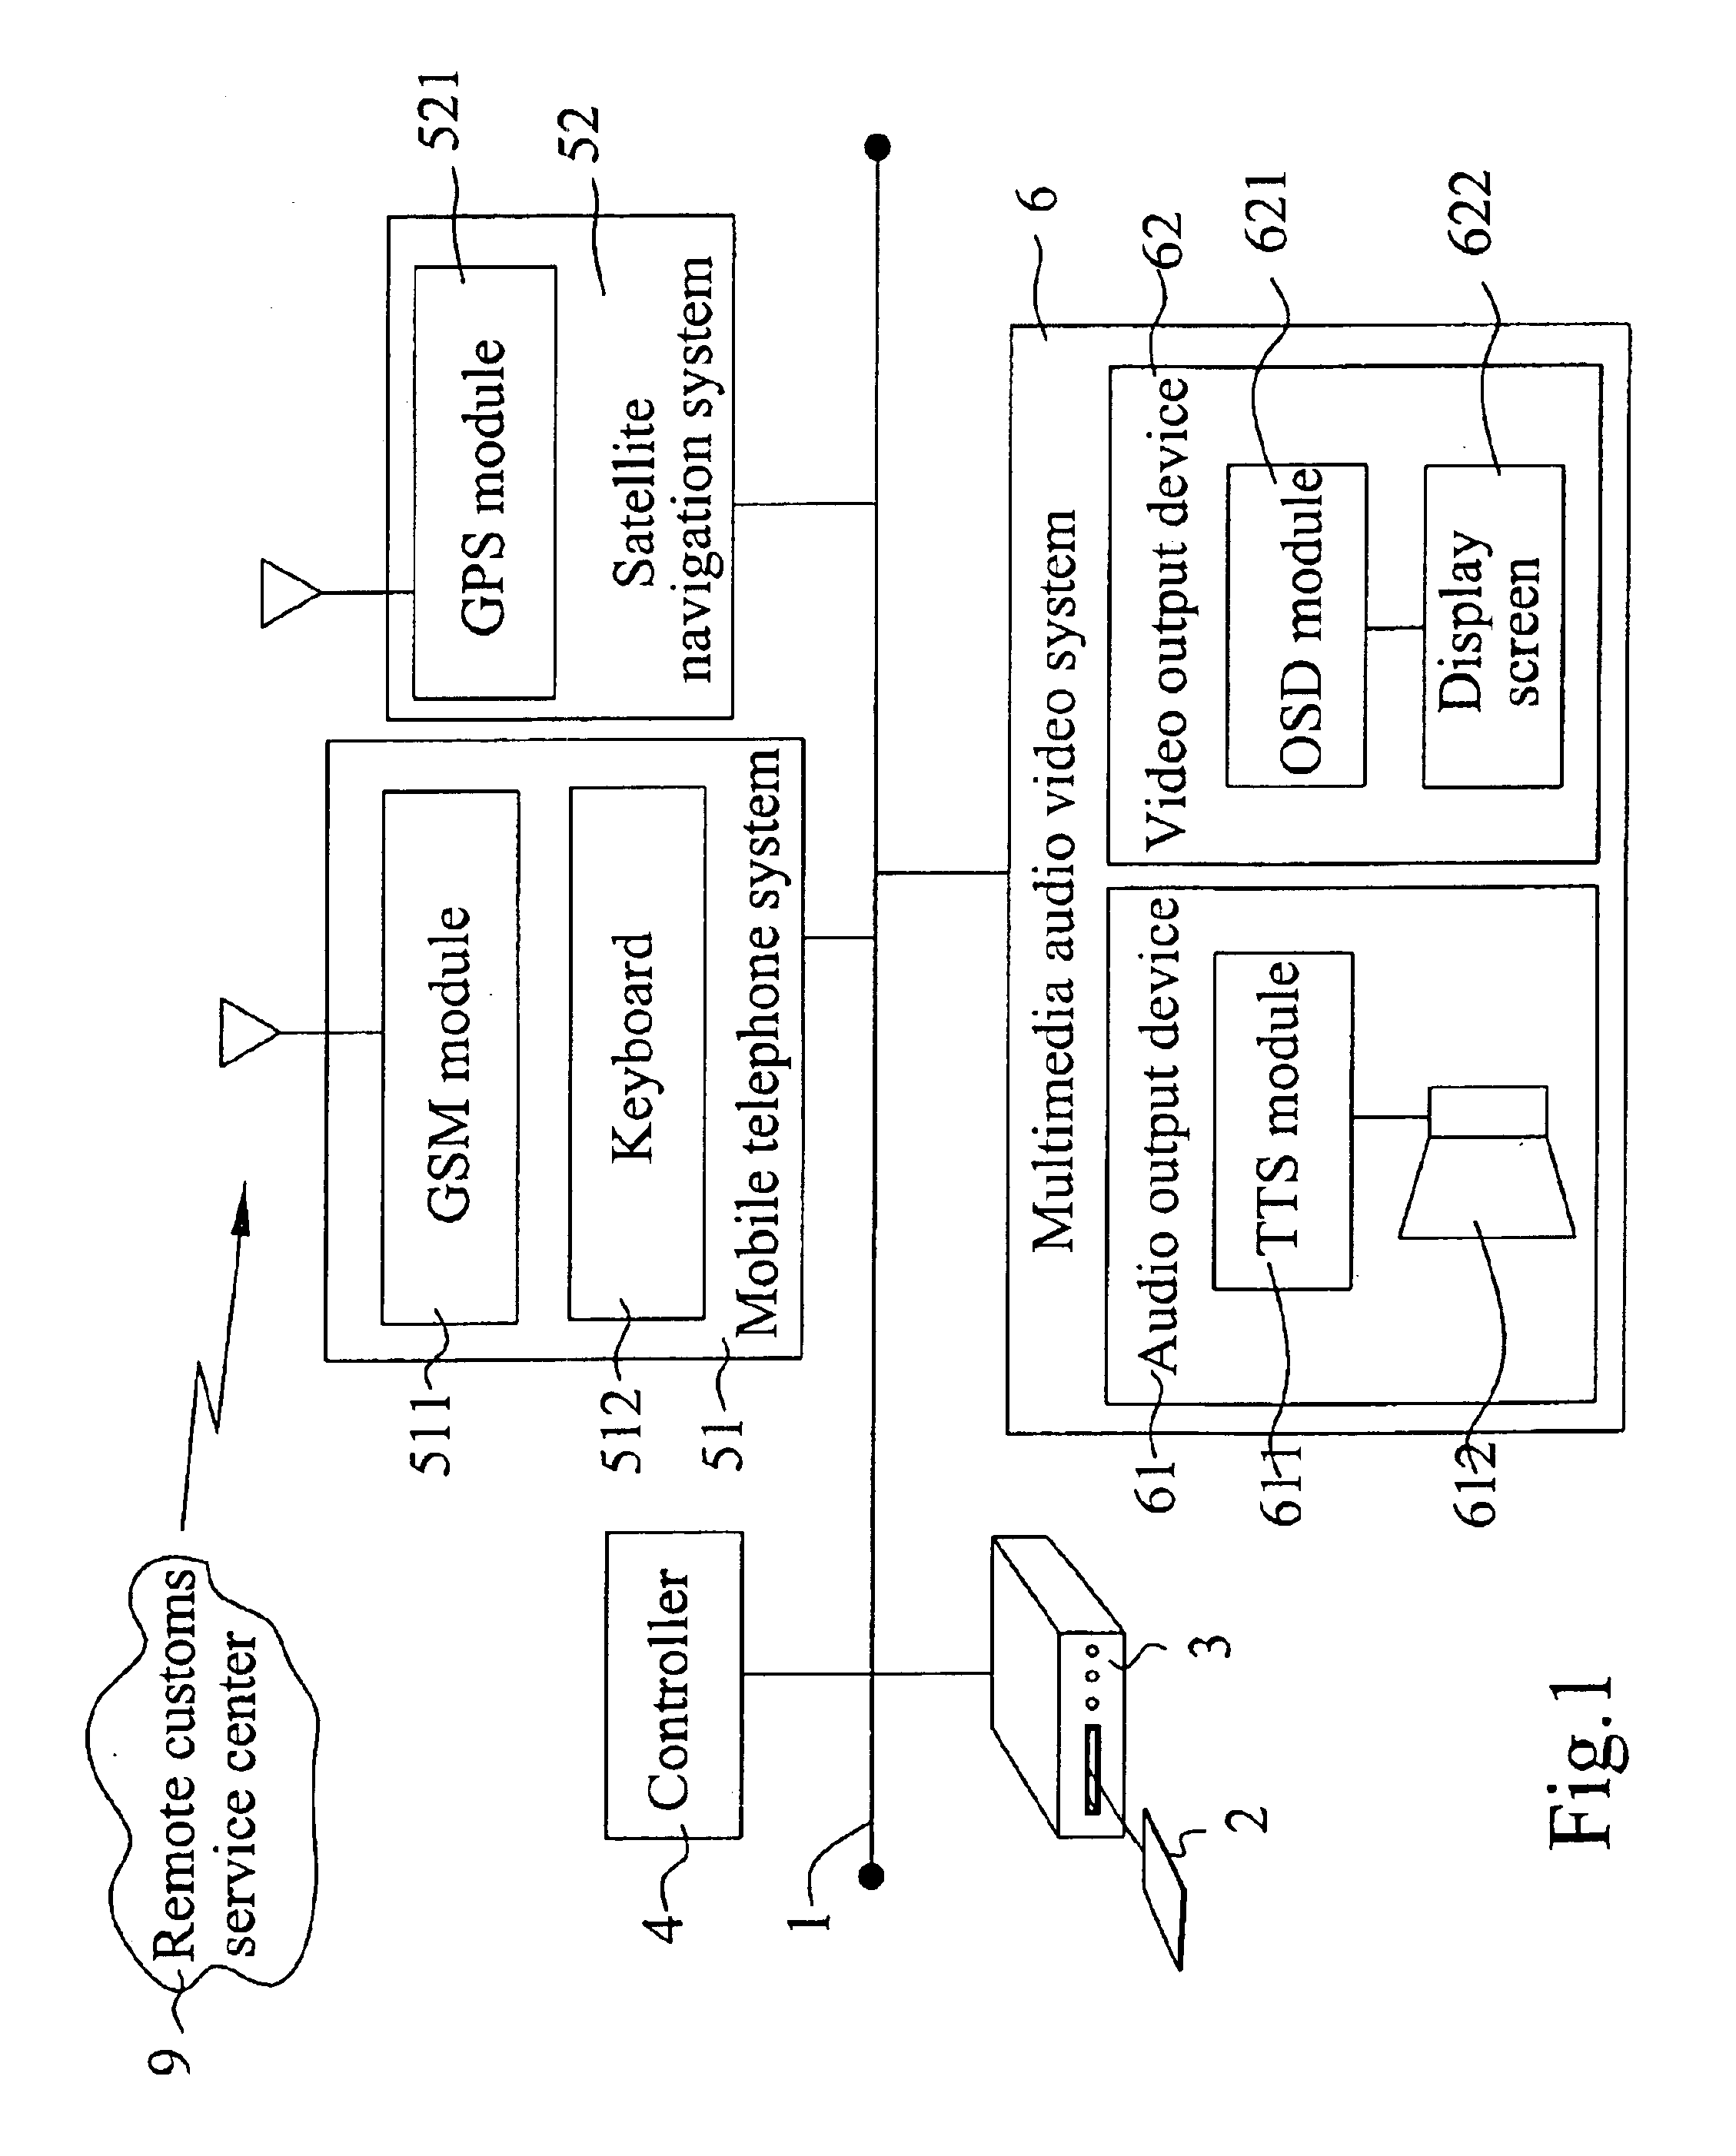 Customerized driving environment setting system for use in a motor vehicle